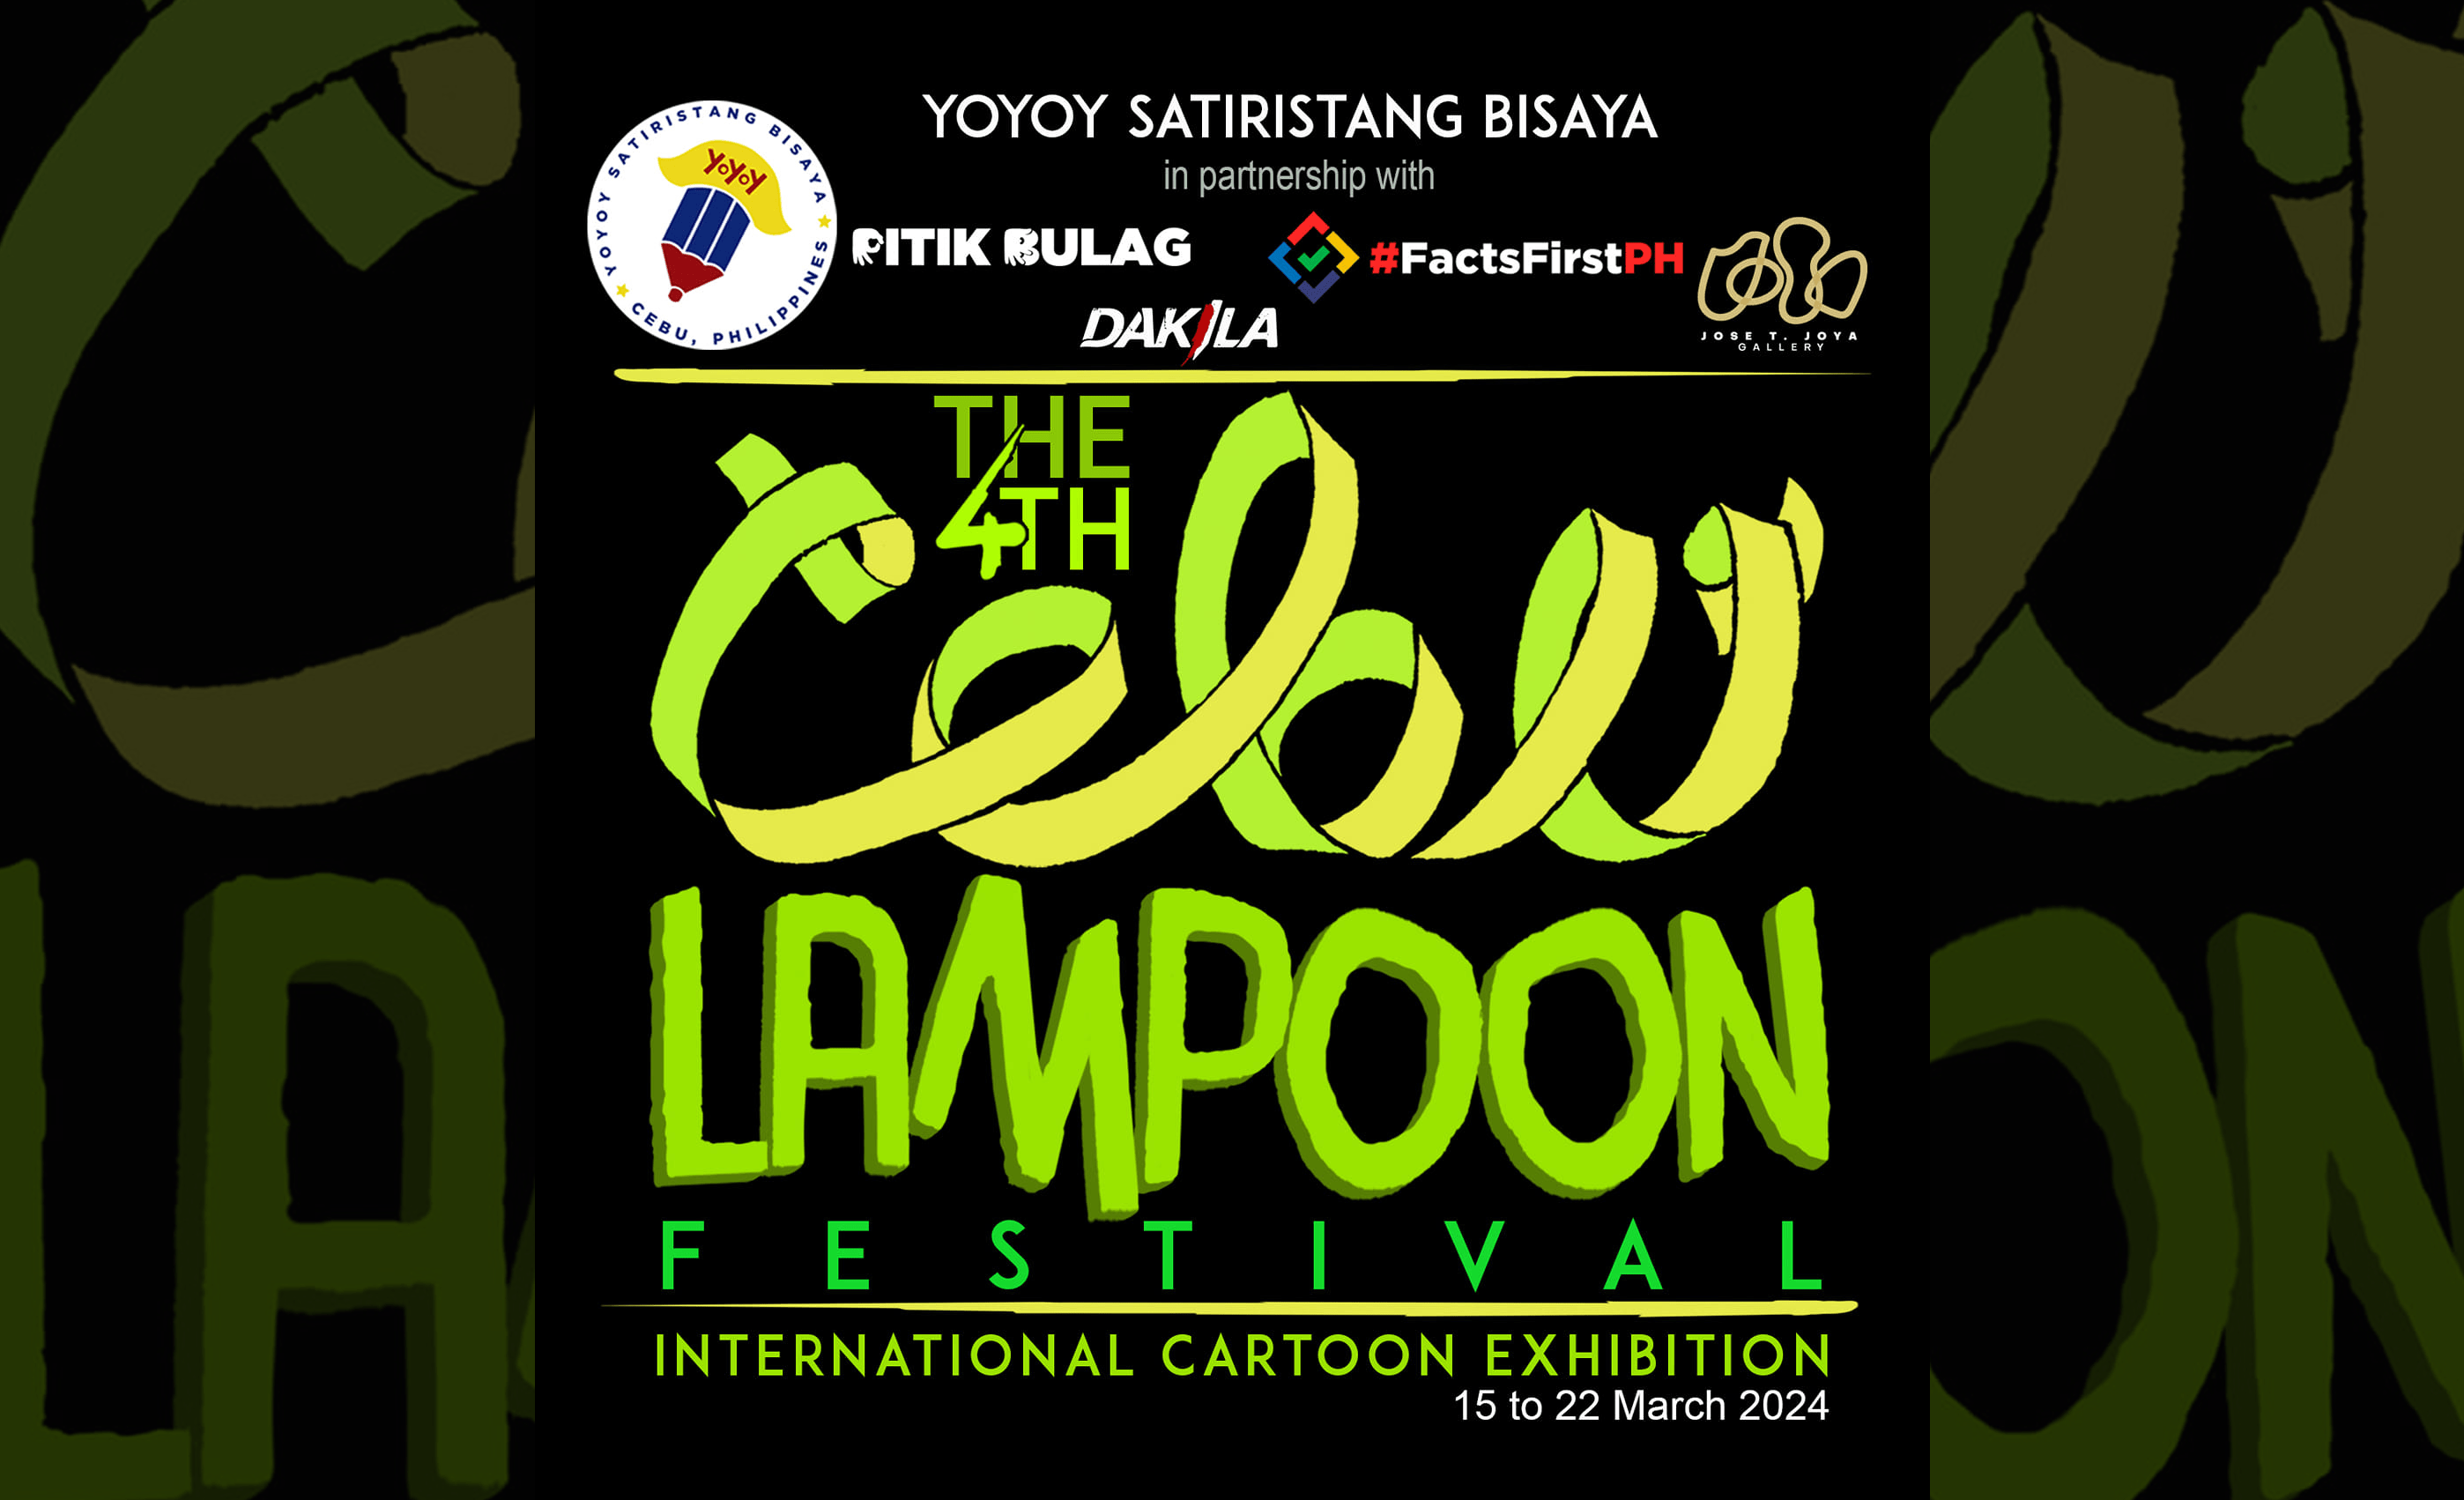 Cebu Lampoon Festival calls for cartoons about fighting disinfo